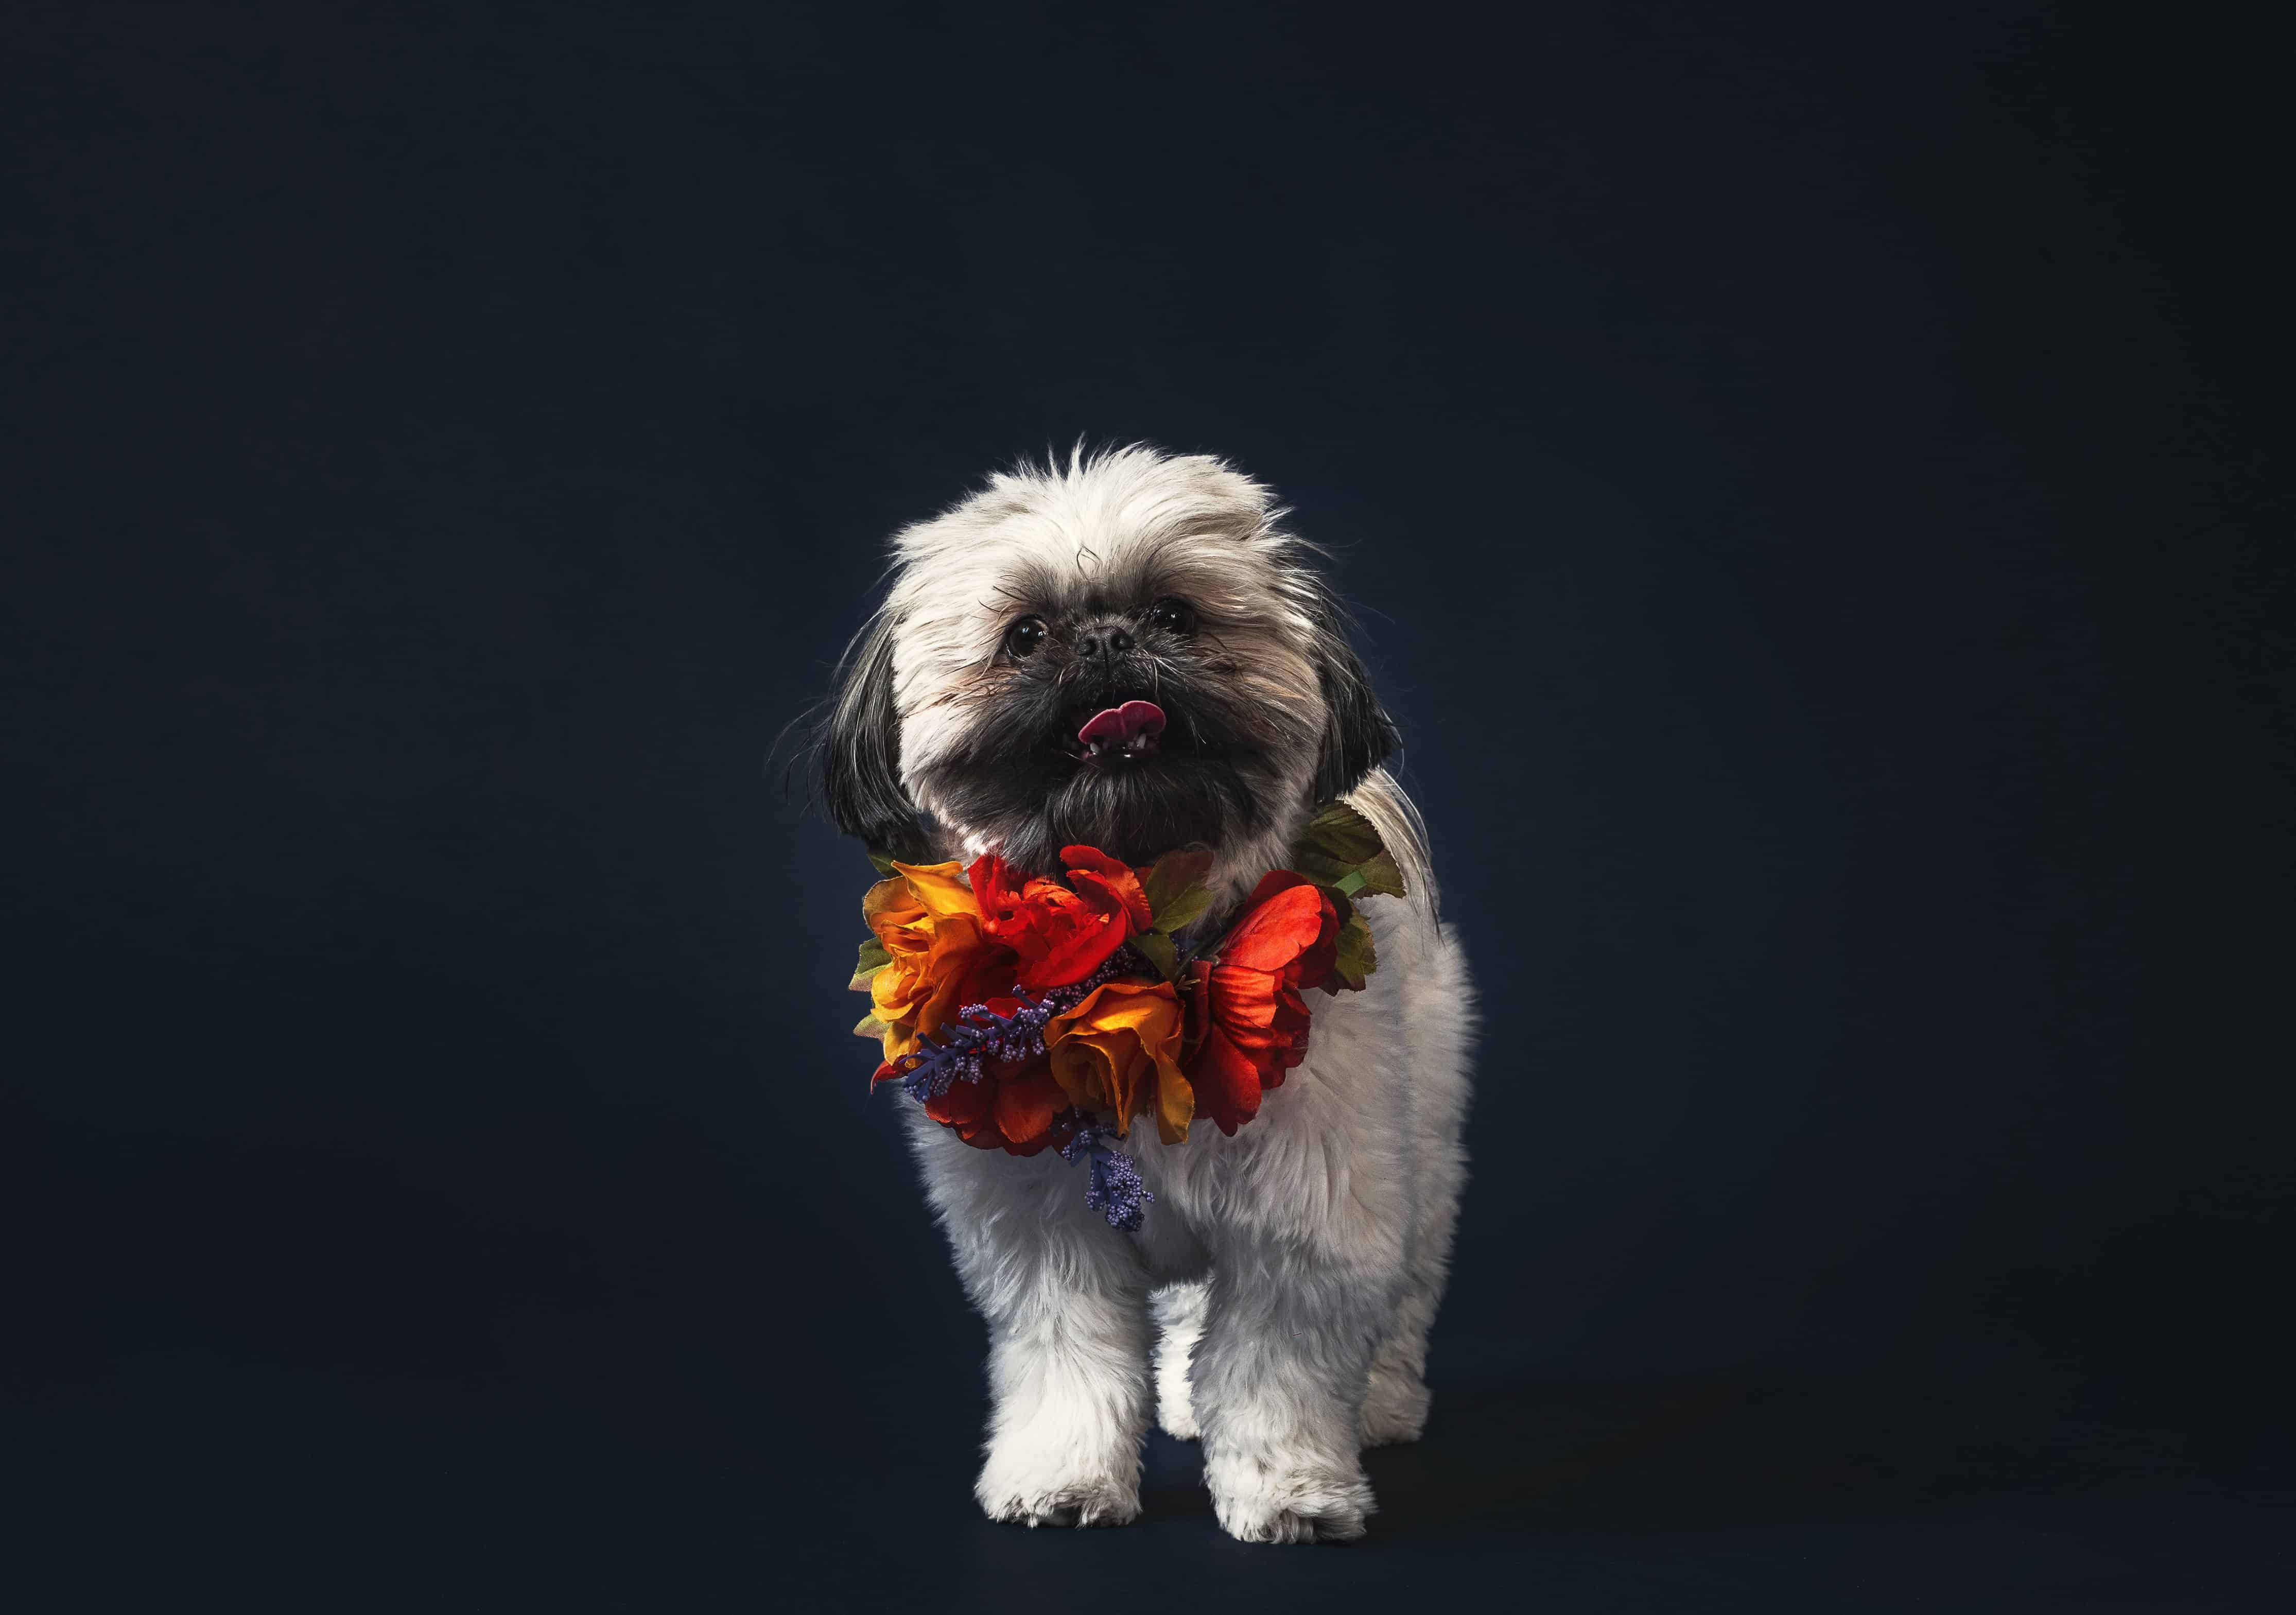 A fluffy dog wearing a necklace of flowers implying pet at wedding